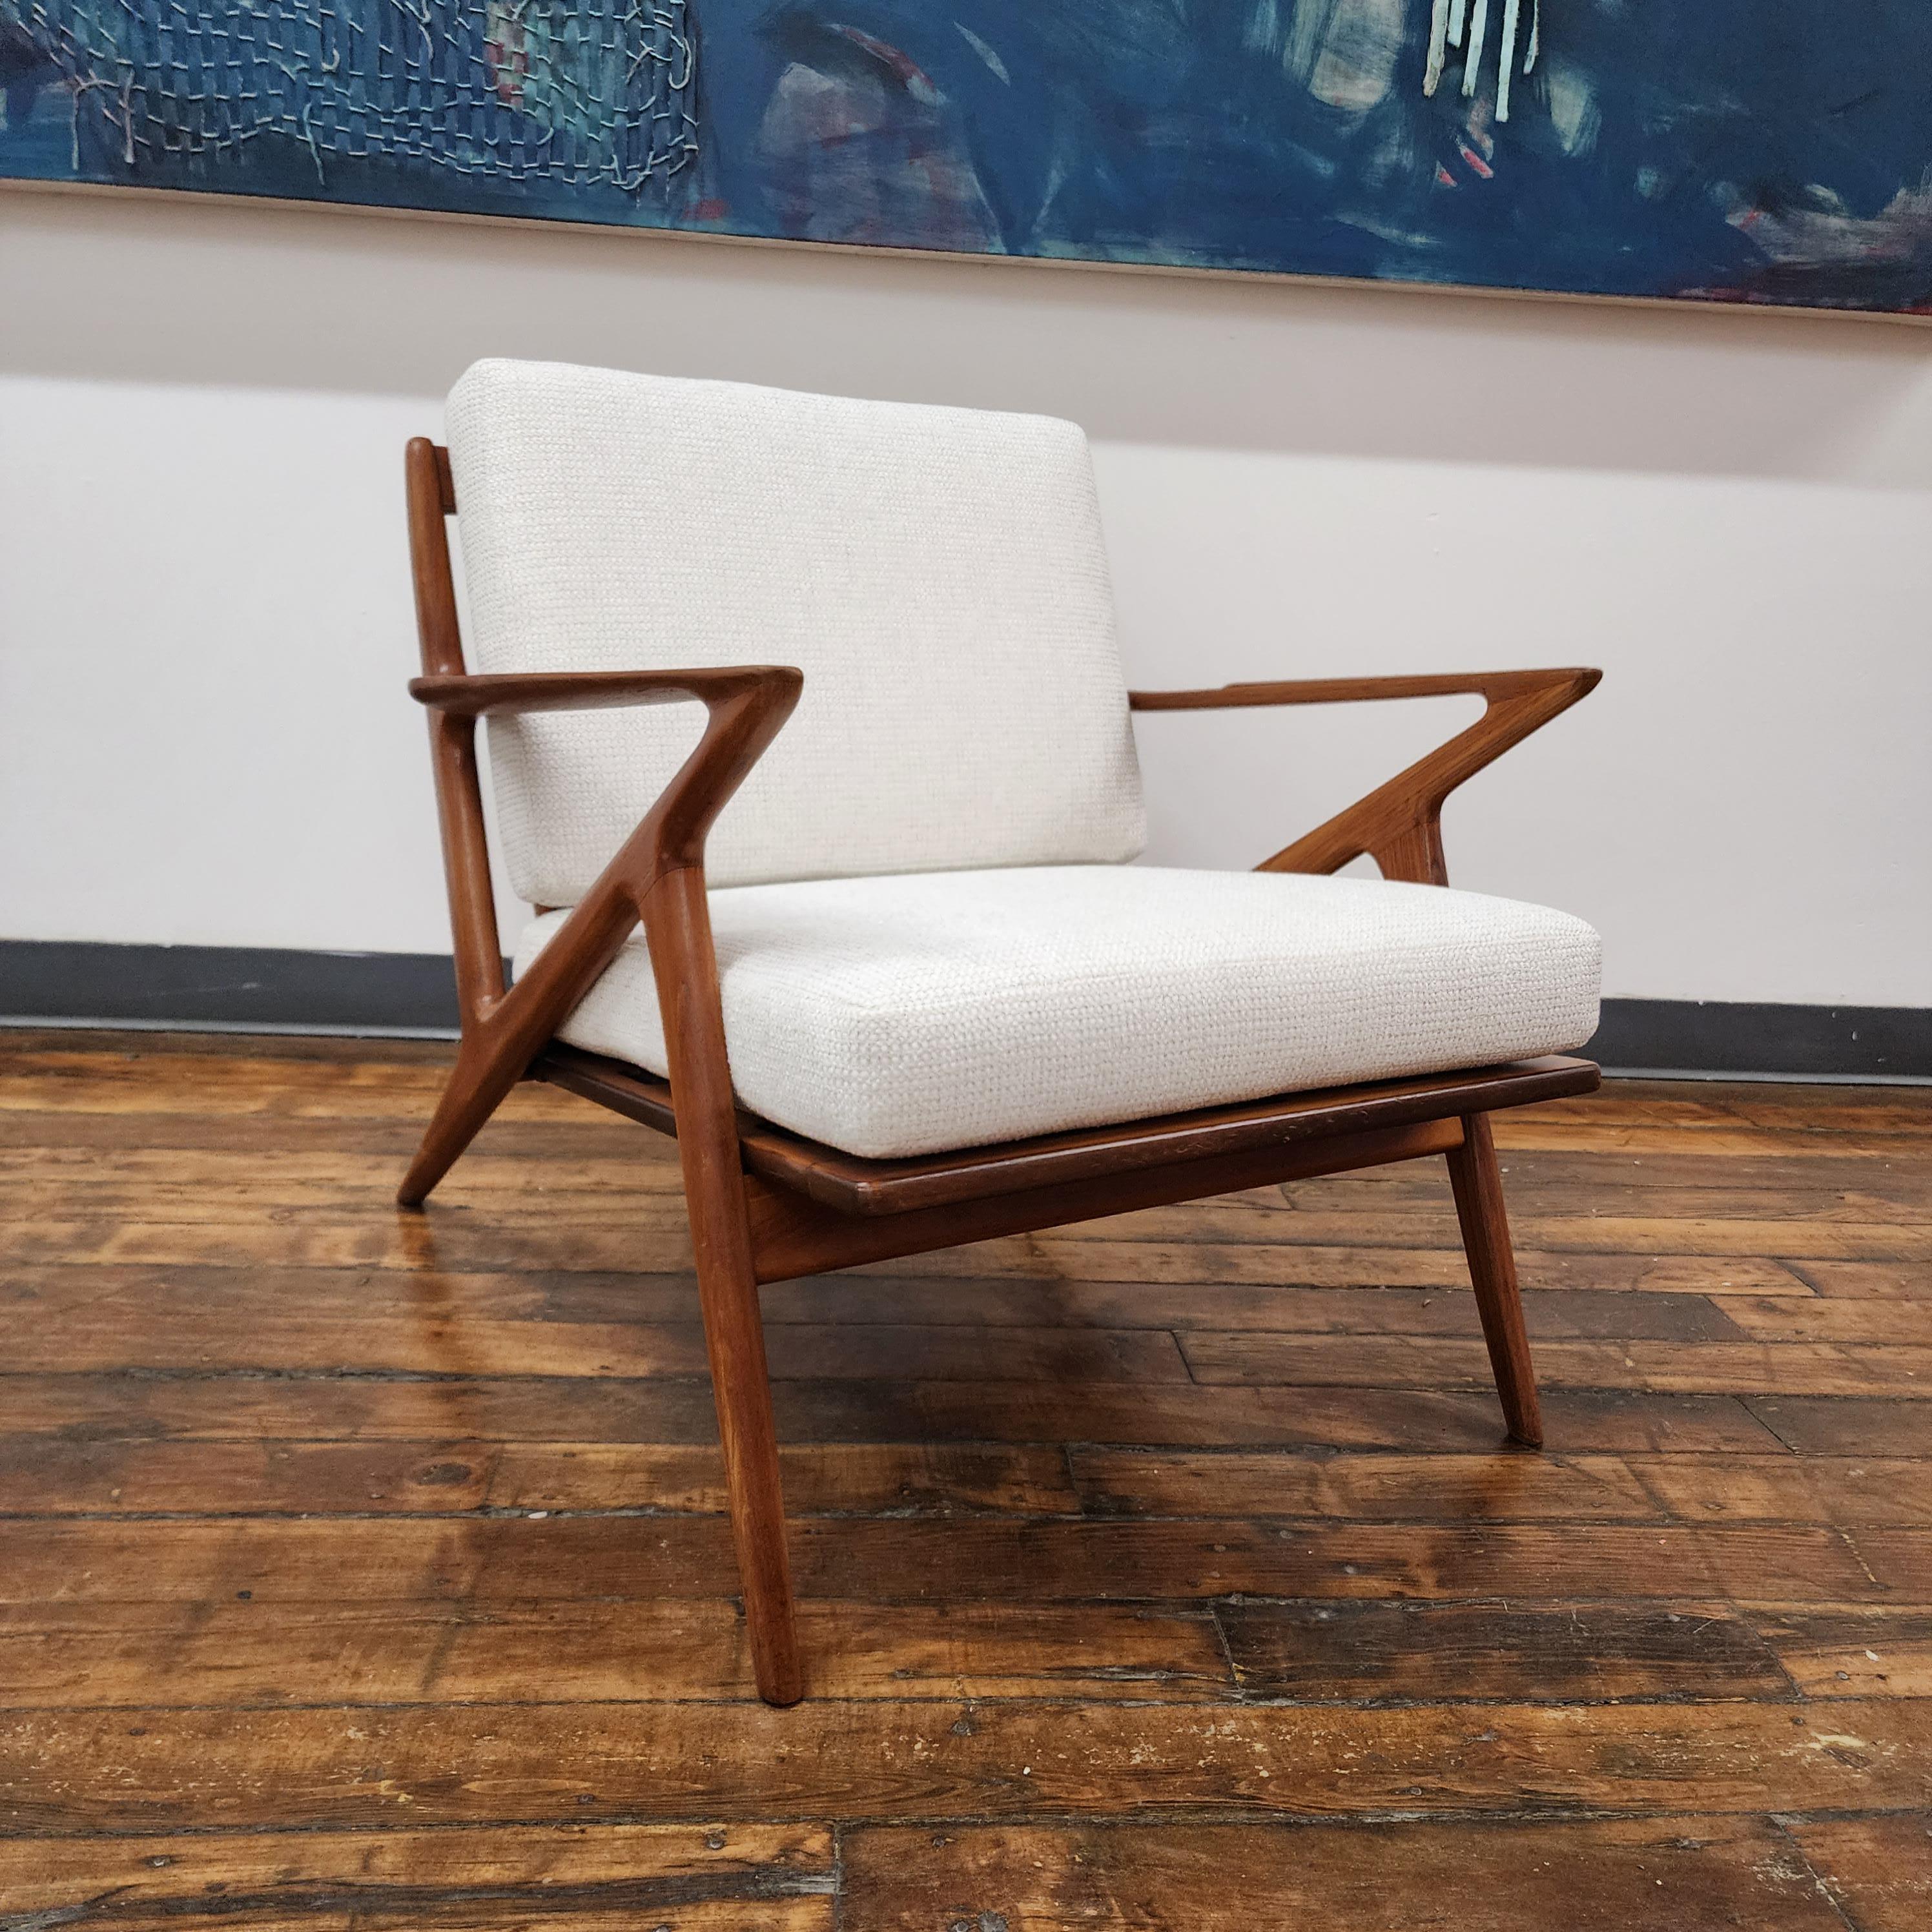 Pair, Vintage Teak Z Chairs by Poul Jensen for Selig 2